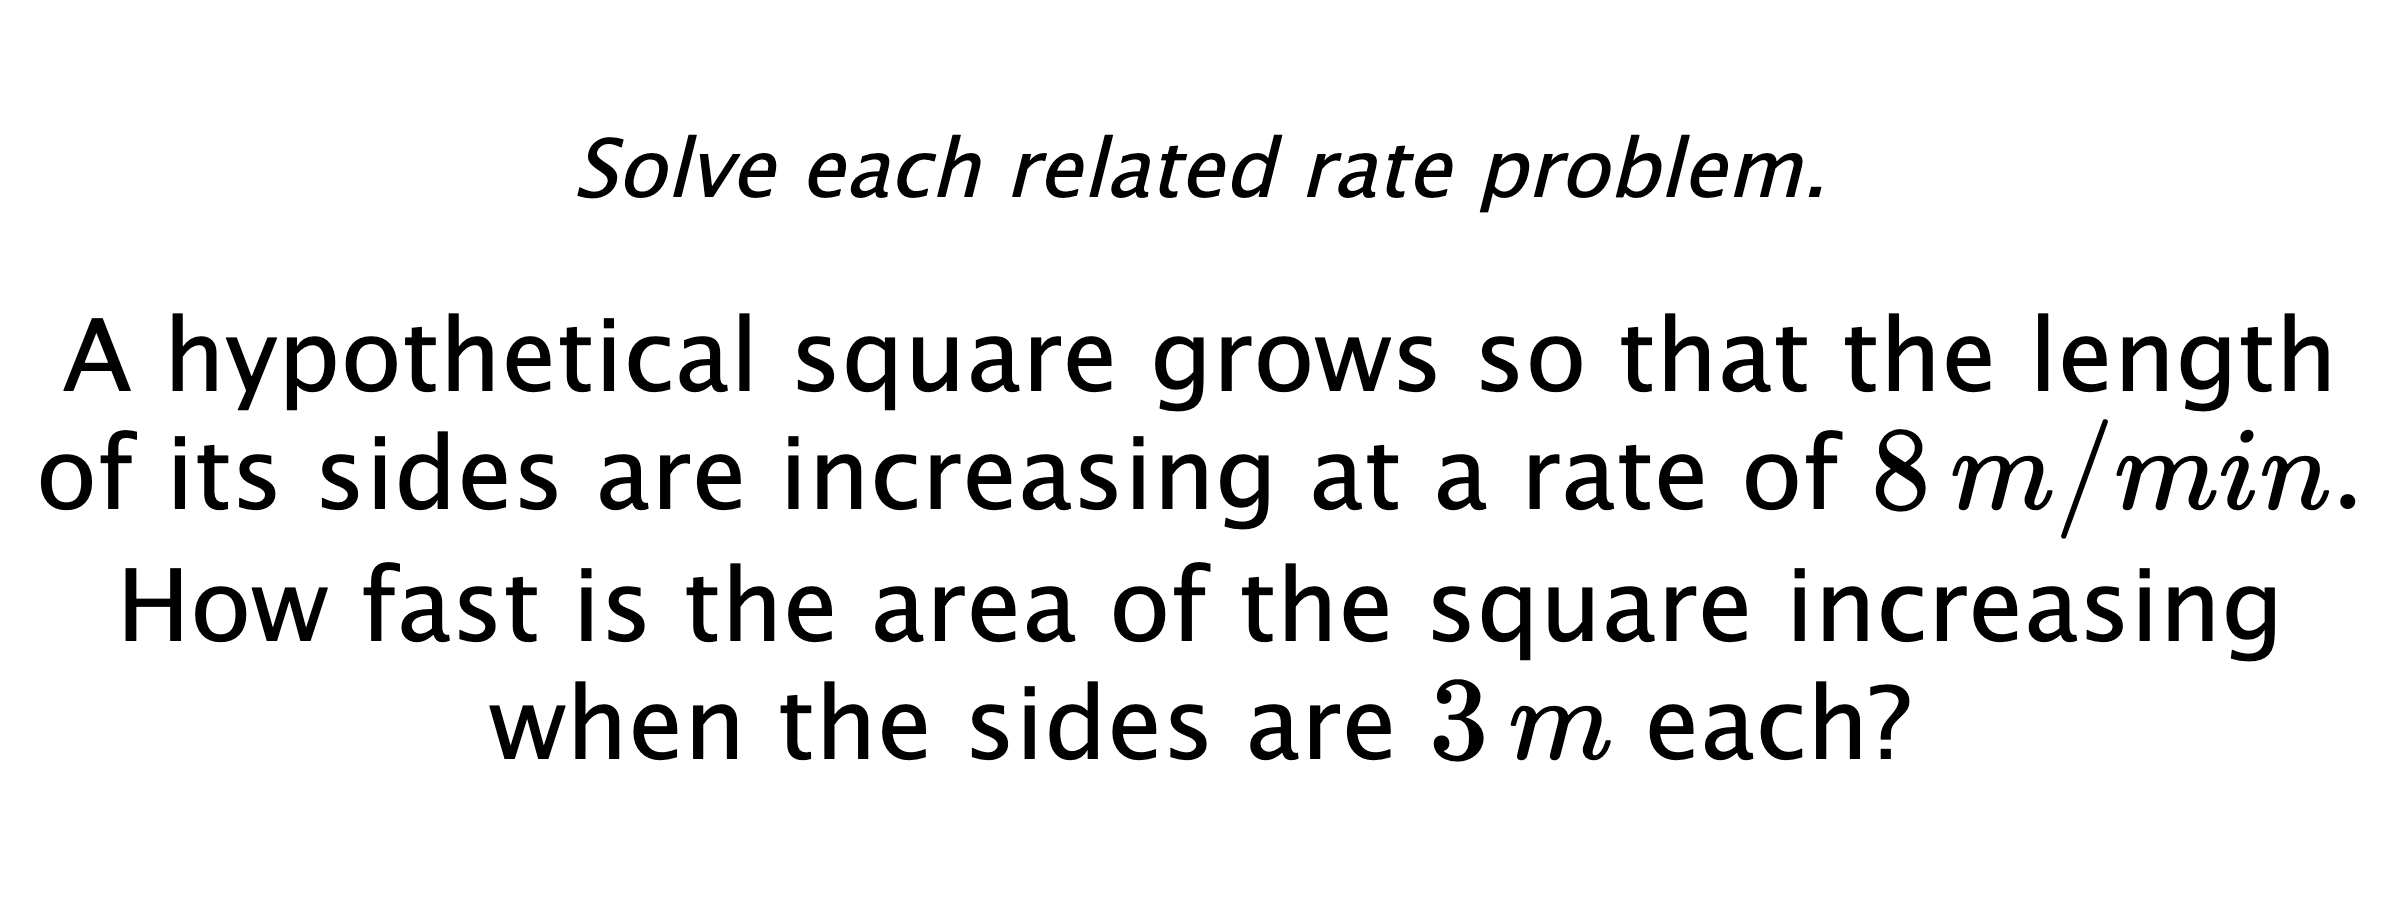 Solve each related rate problem. A hypothetical square grows so that the length of its sides are increasing at a rate of $8\,m/min.$ How fast is the area of the square increasing when the sides are $3\,m$ each?